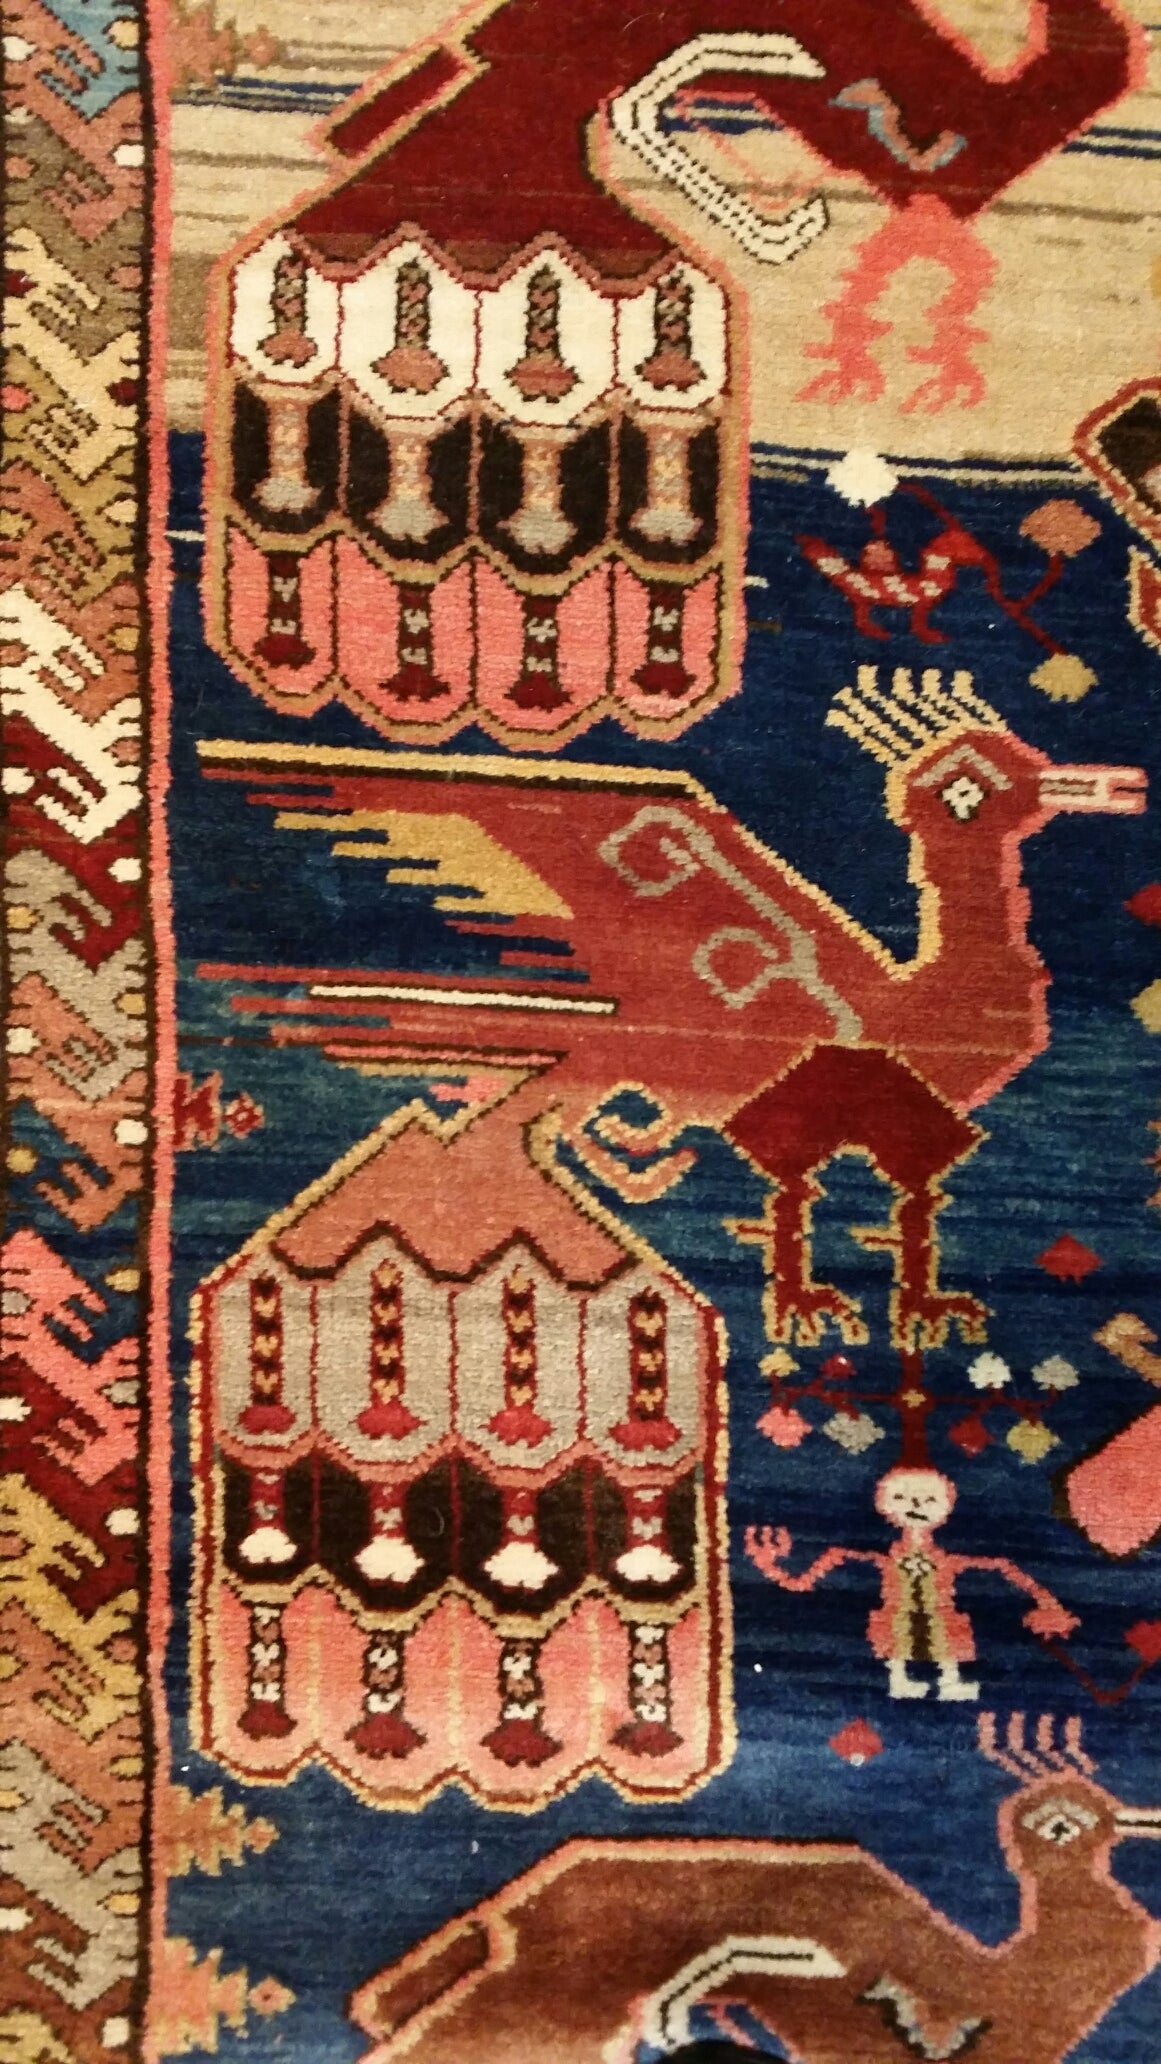 Ingush small tribe (Sunni) living in Daghestan in NE Caucasus. Design: Variegated blue ground with large, decorative peacocks ect. This rug has hung horisontally all it's life ( see rings on the reverse ) , so it is top condition. Warp: Z2S plied (